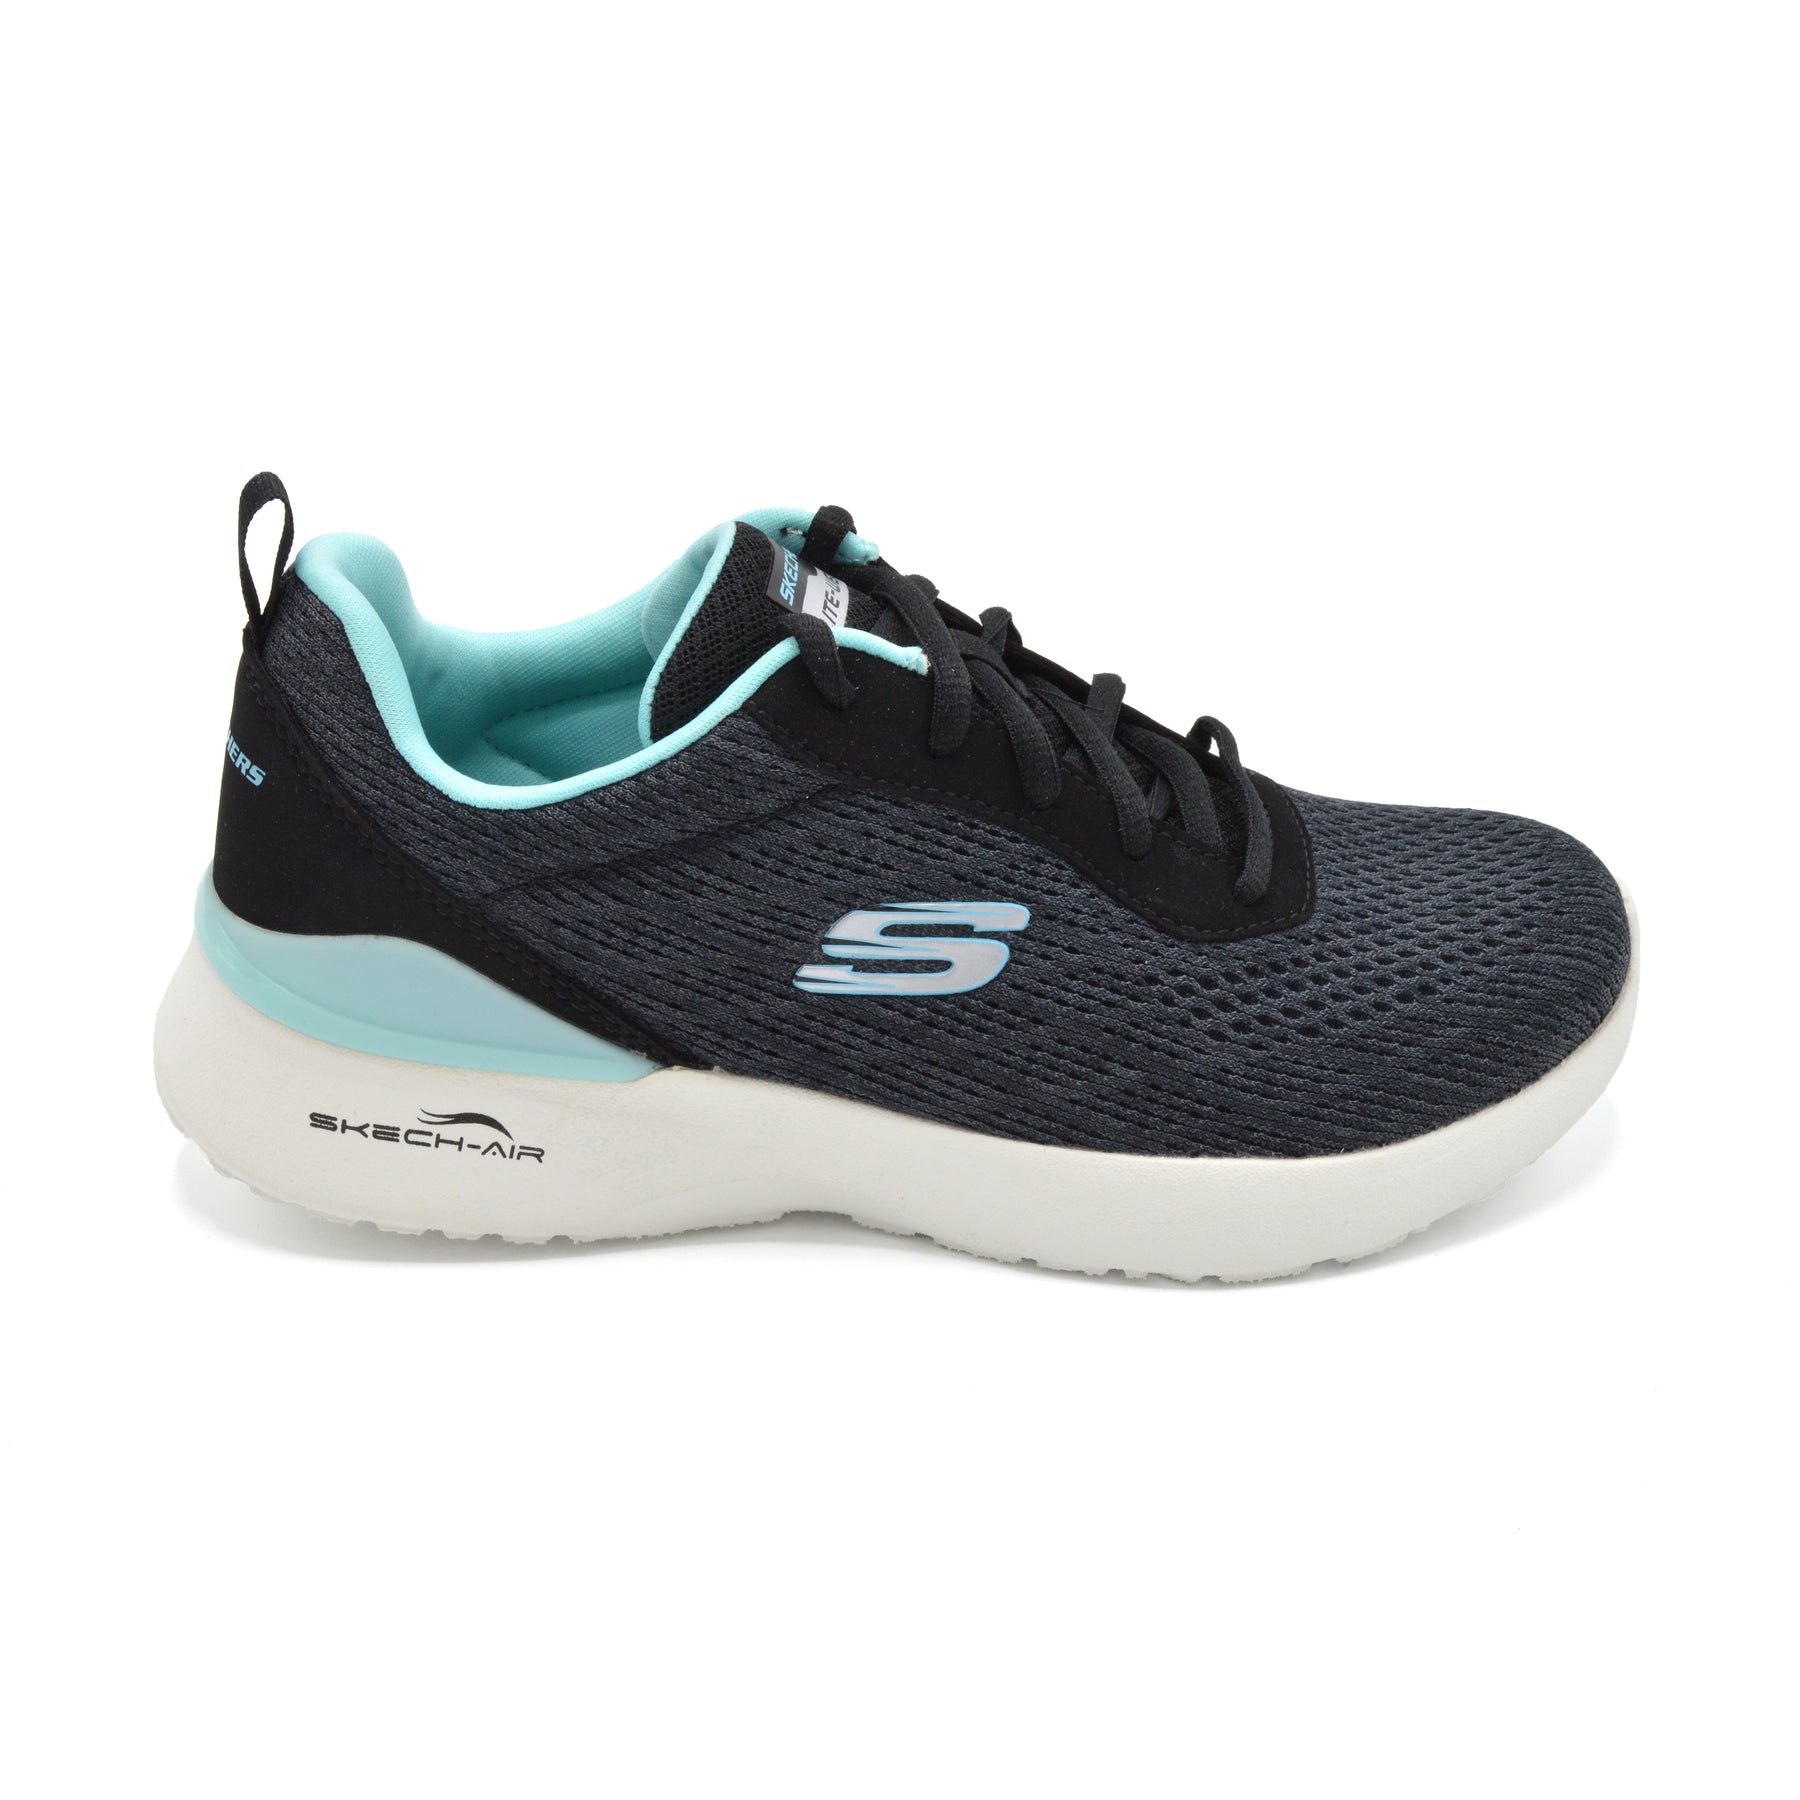 New For Spring! Ladies Wide Fit Skechers